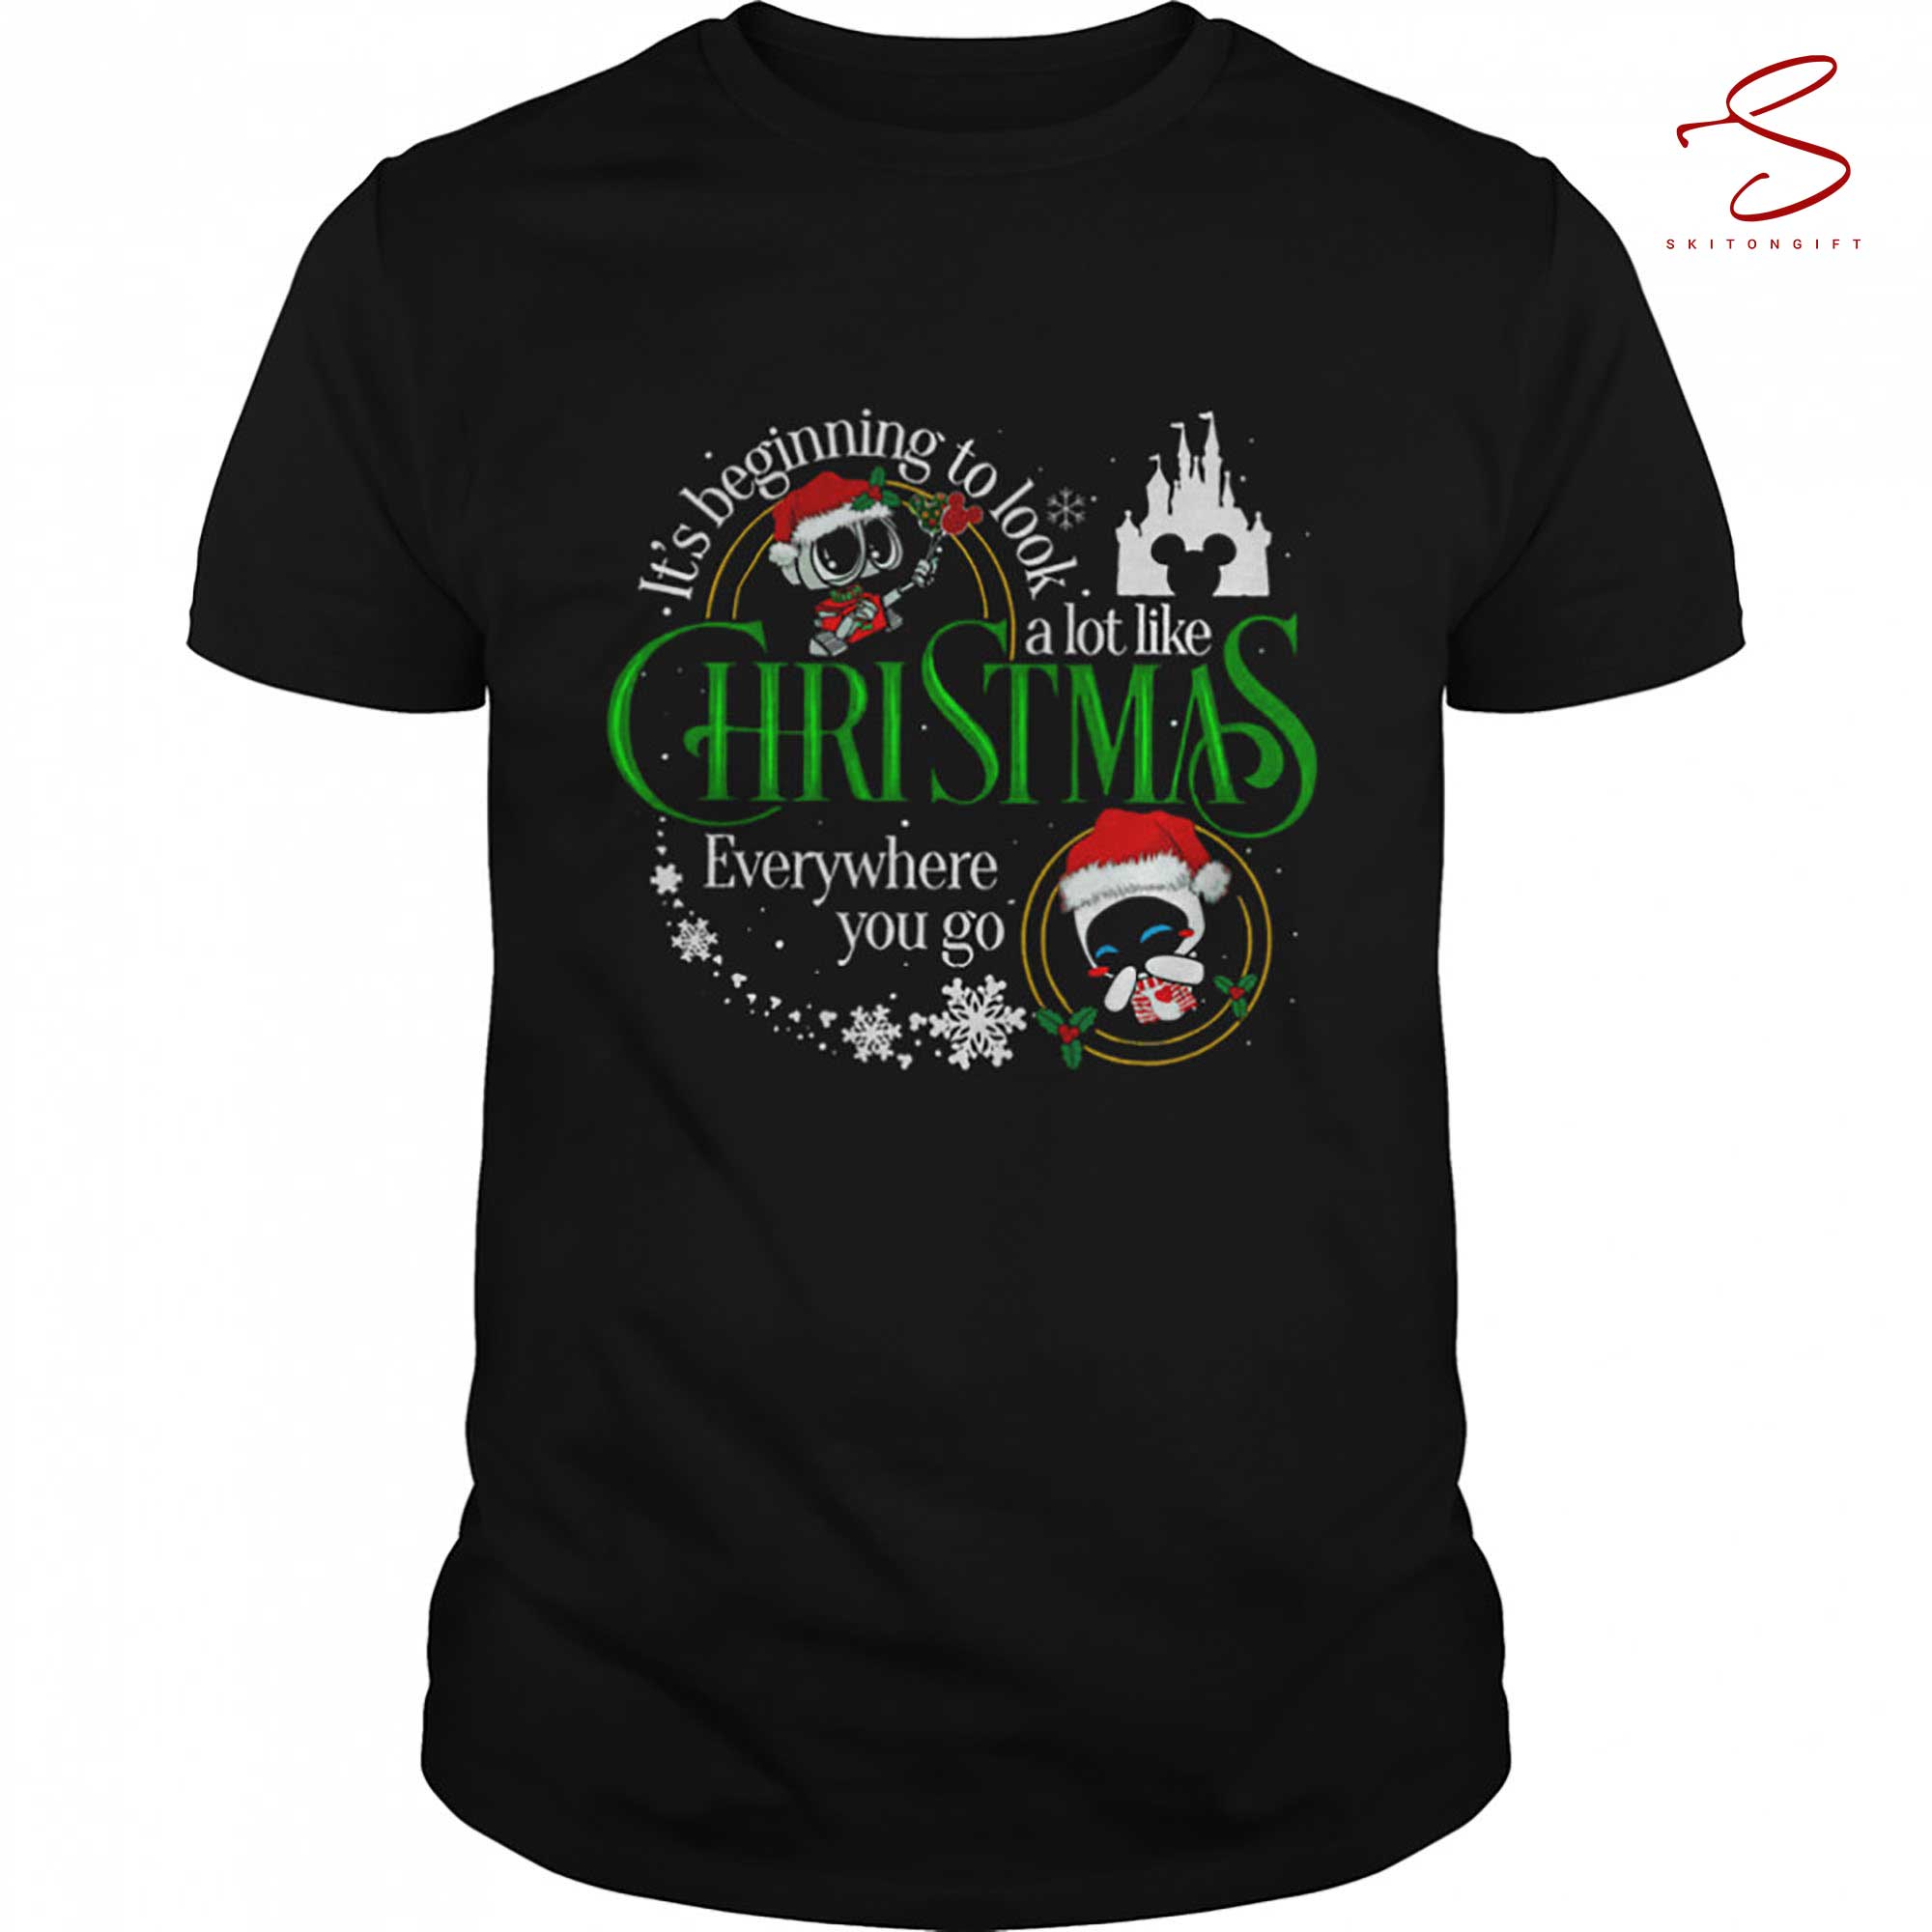 Skitongift Its Beginning To Look A Lot Like Christmas Everywhere You Go Shirt